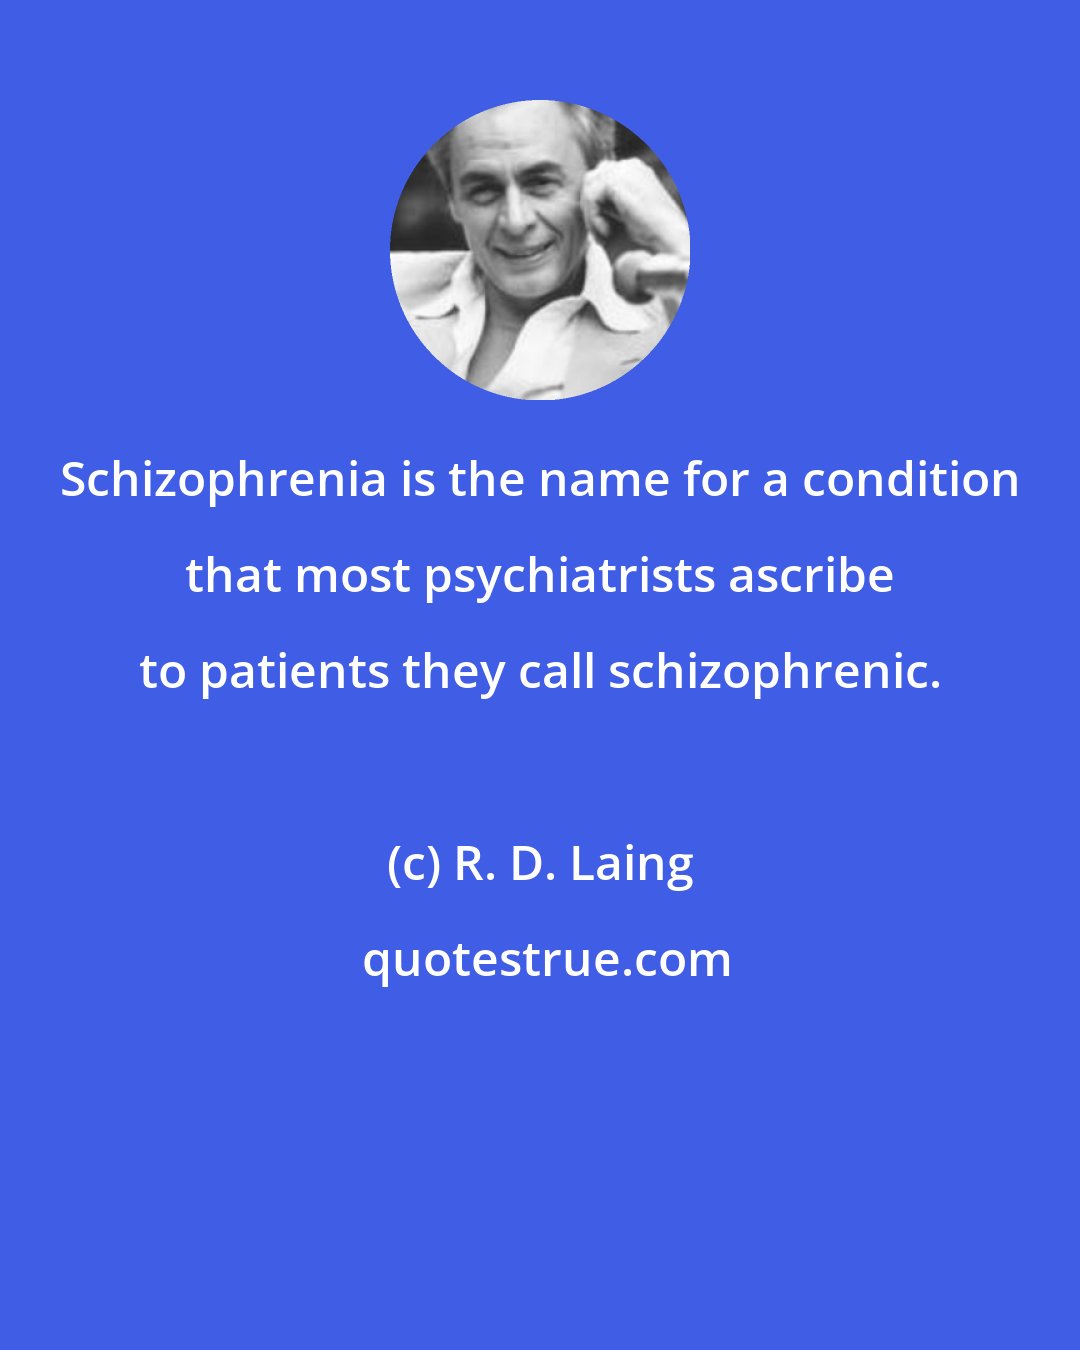 R. D. Laing: Schizophrenia is the name for a condition that most psychiatrists ascribe to patients they call schizophrenic.